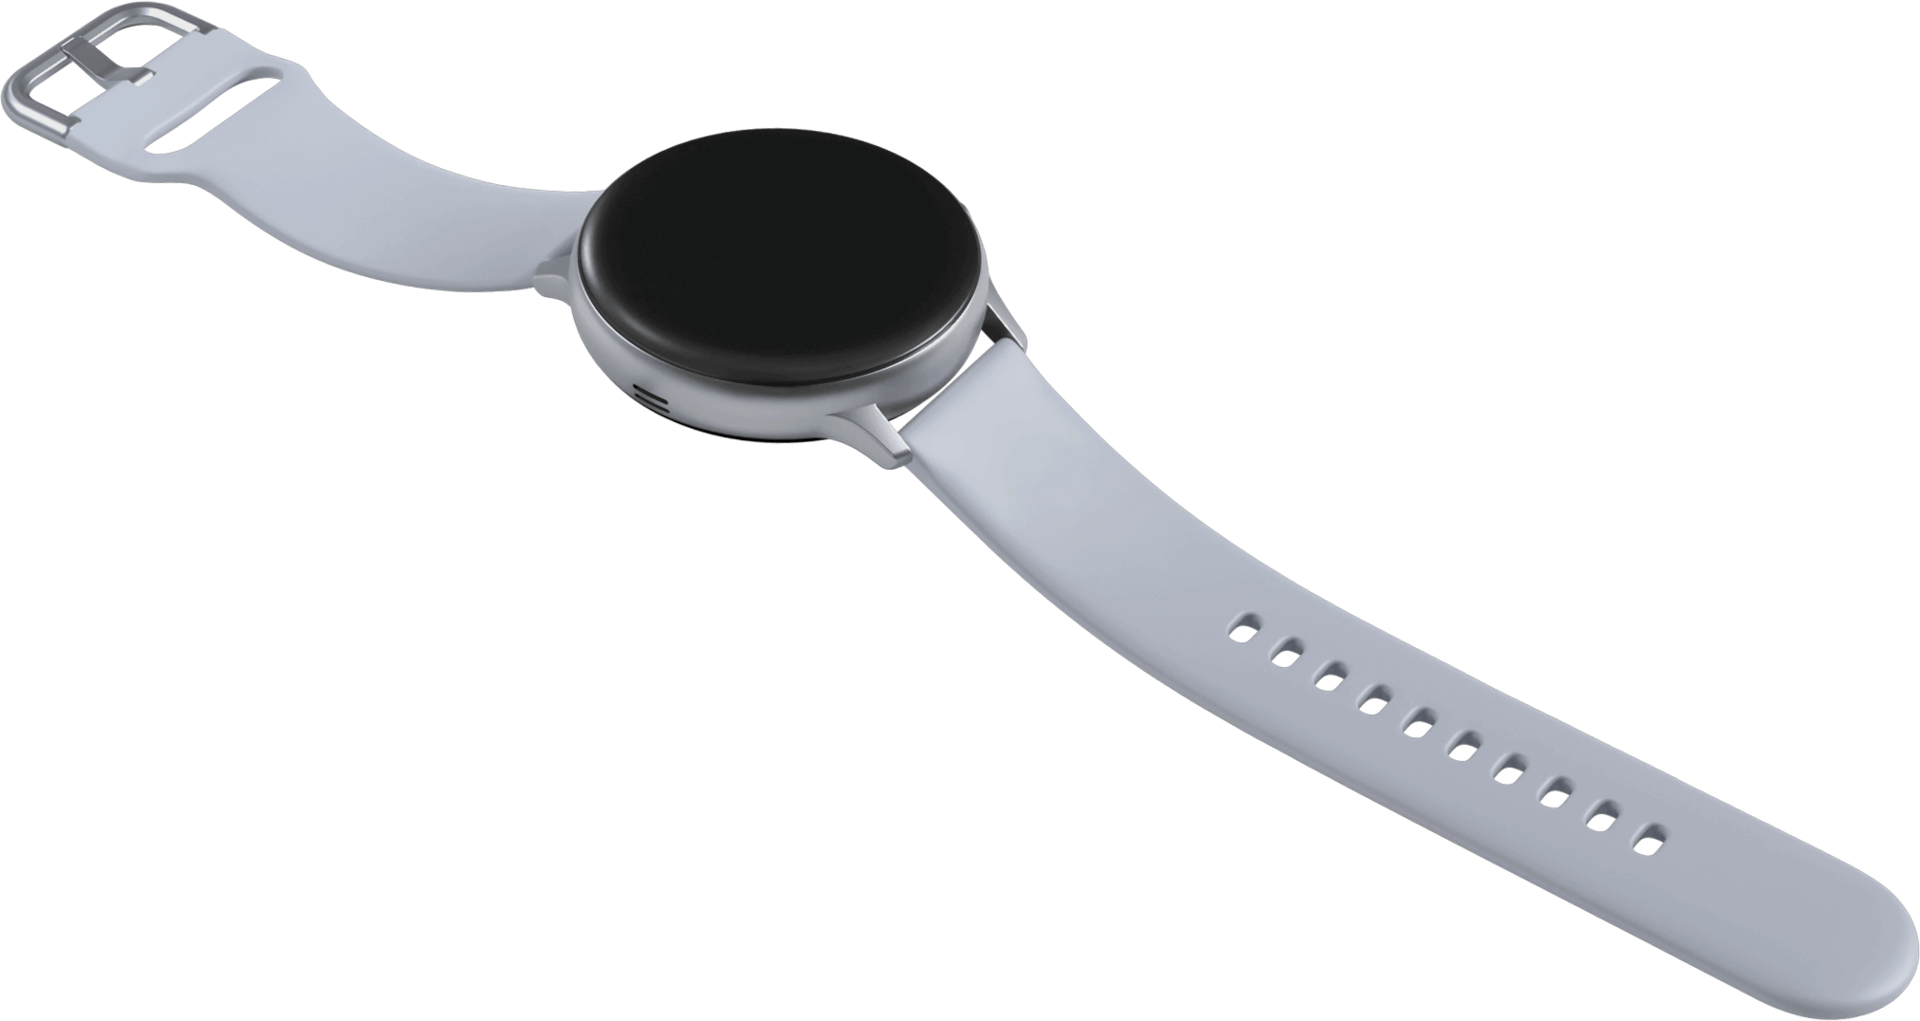 A Galaxy Watch active2 watch in cloud silver charging on a coin-shaped wireless charger directly below it that has the same circumference as the watch face.